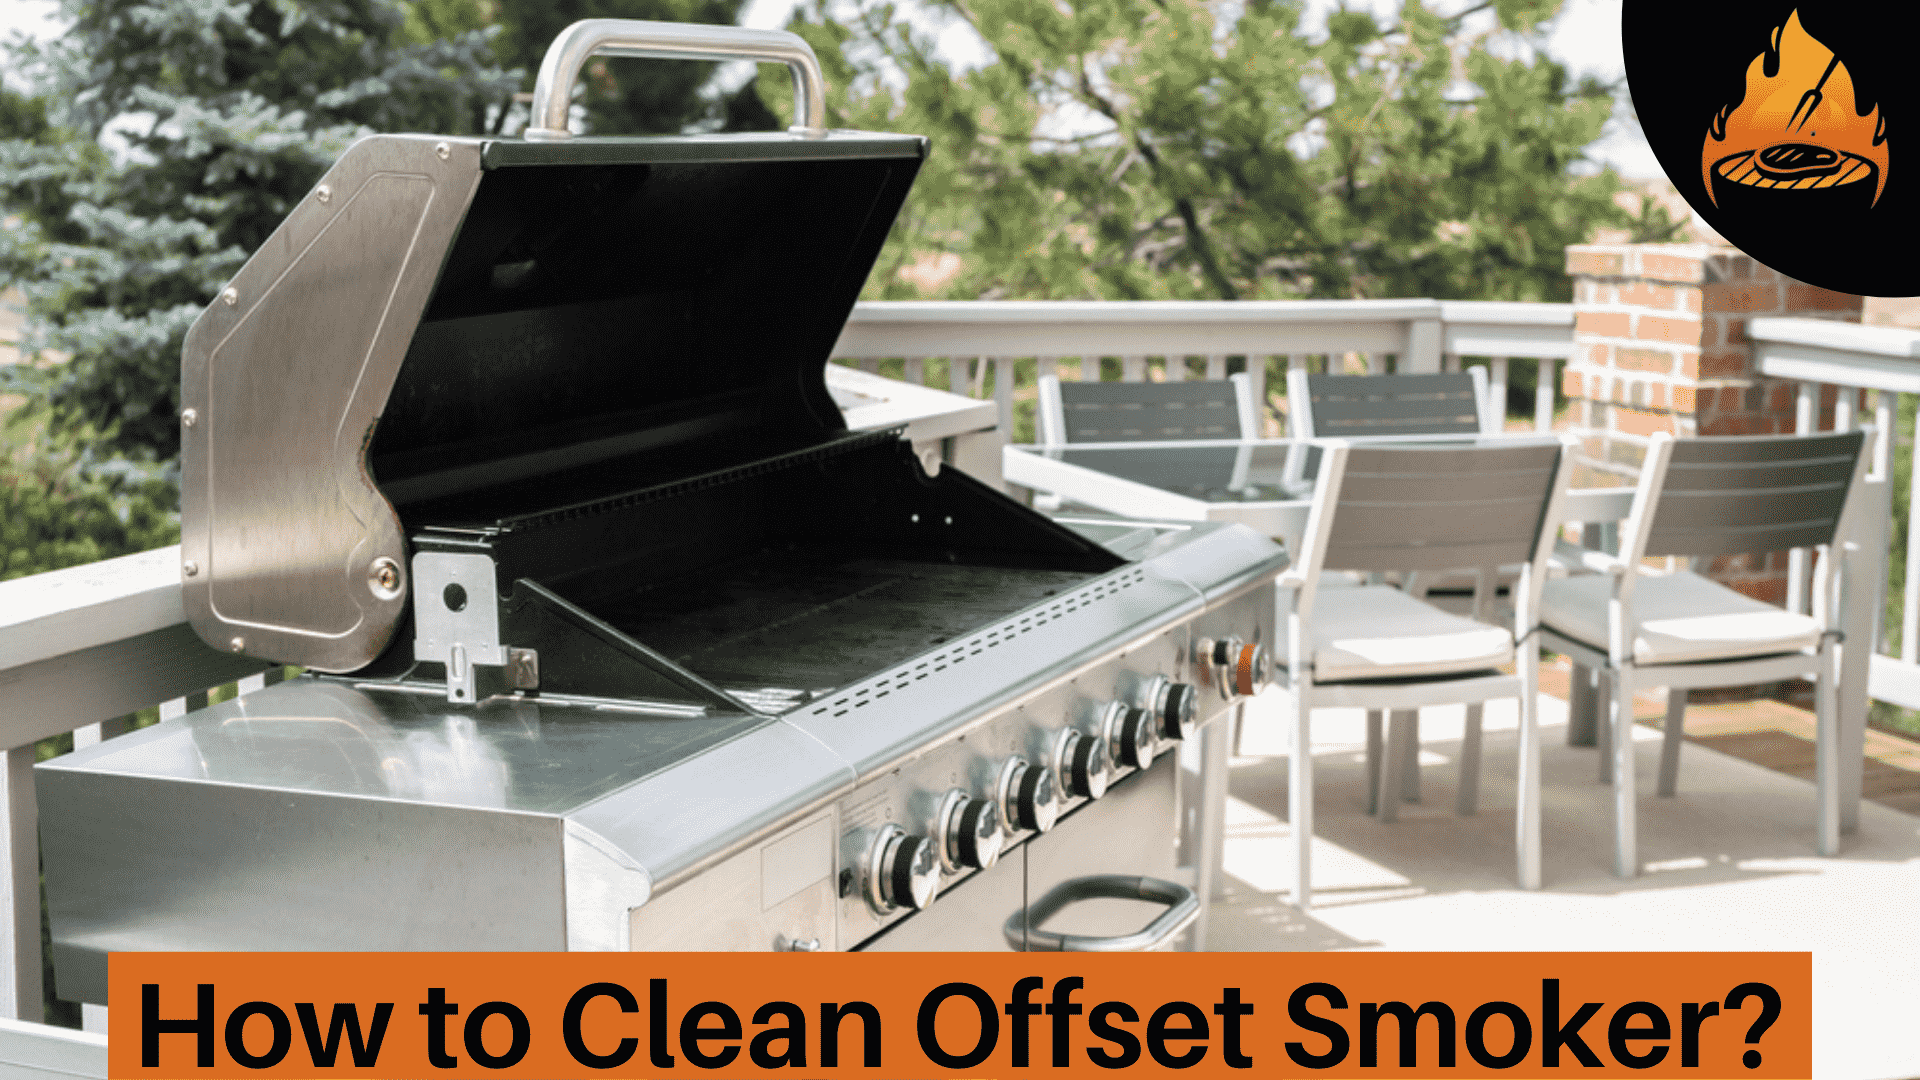 How to Clean Offset Smoker